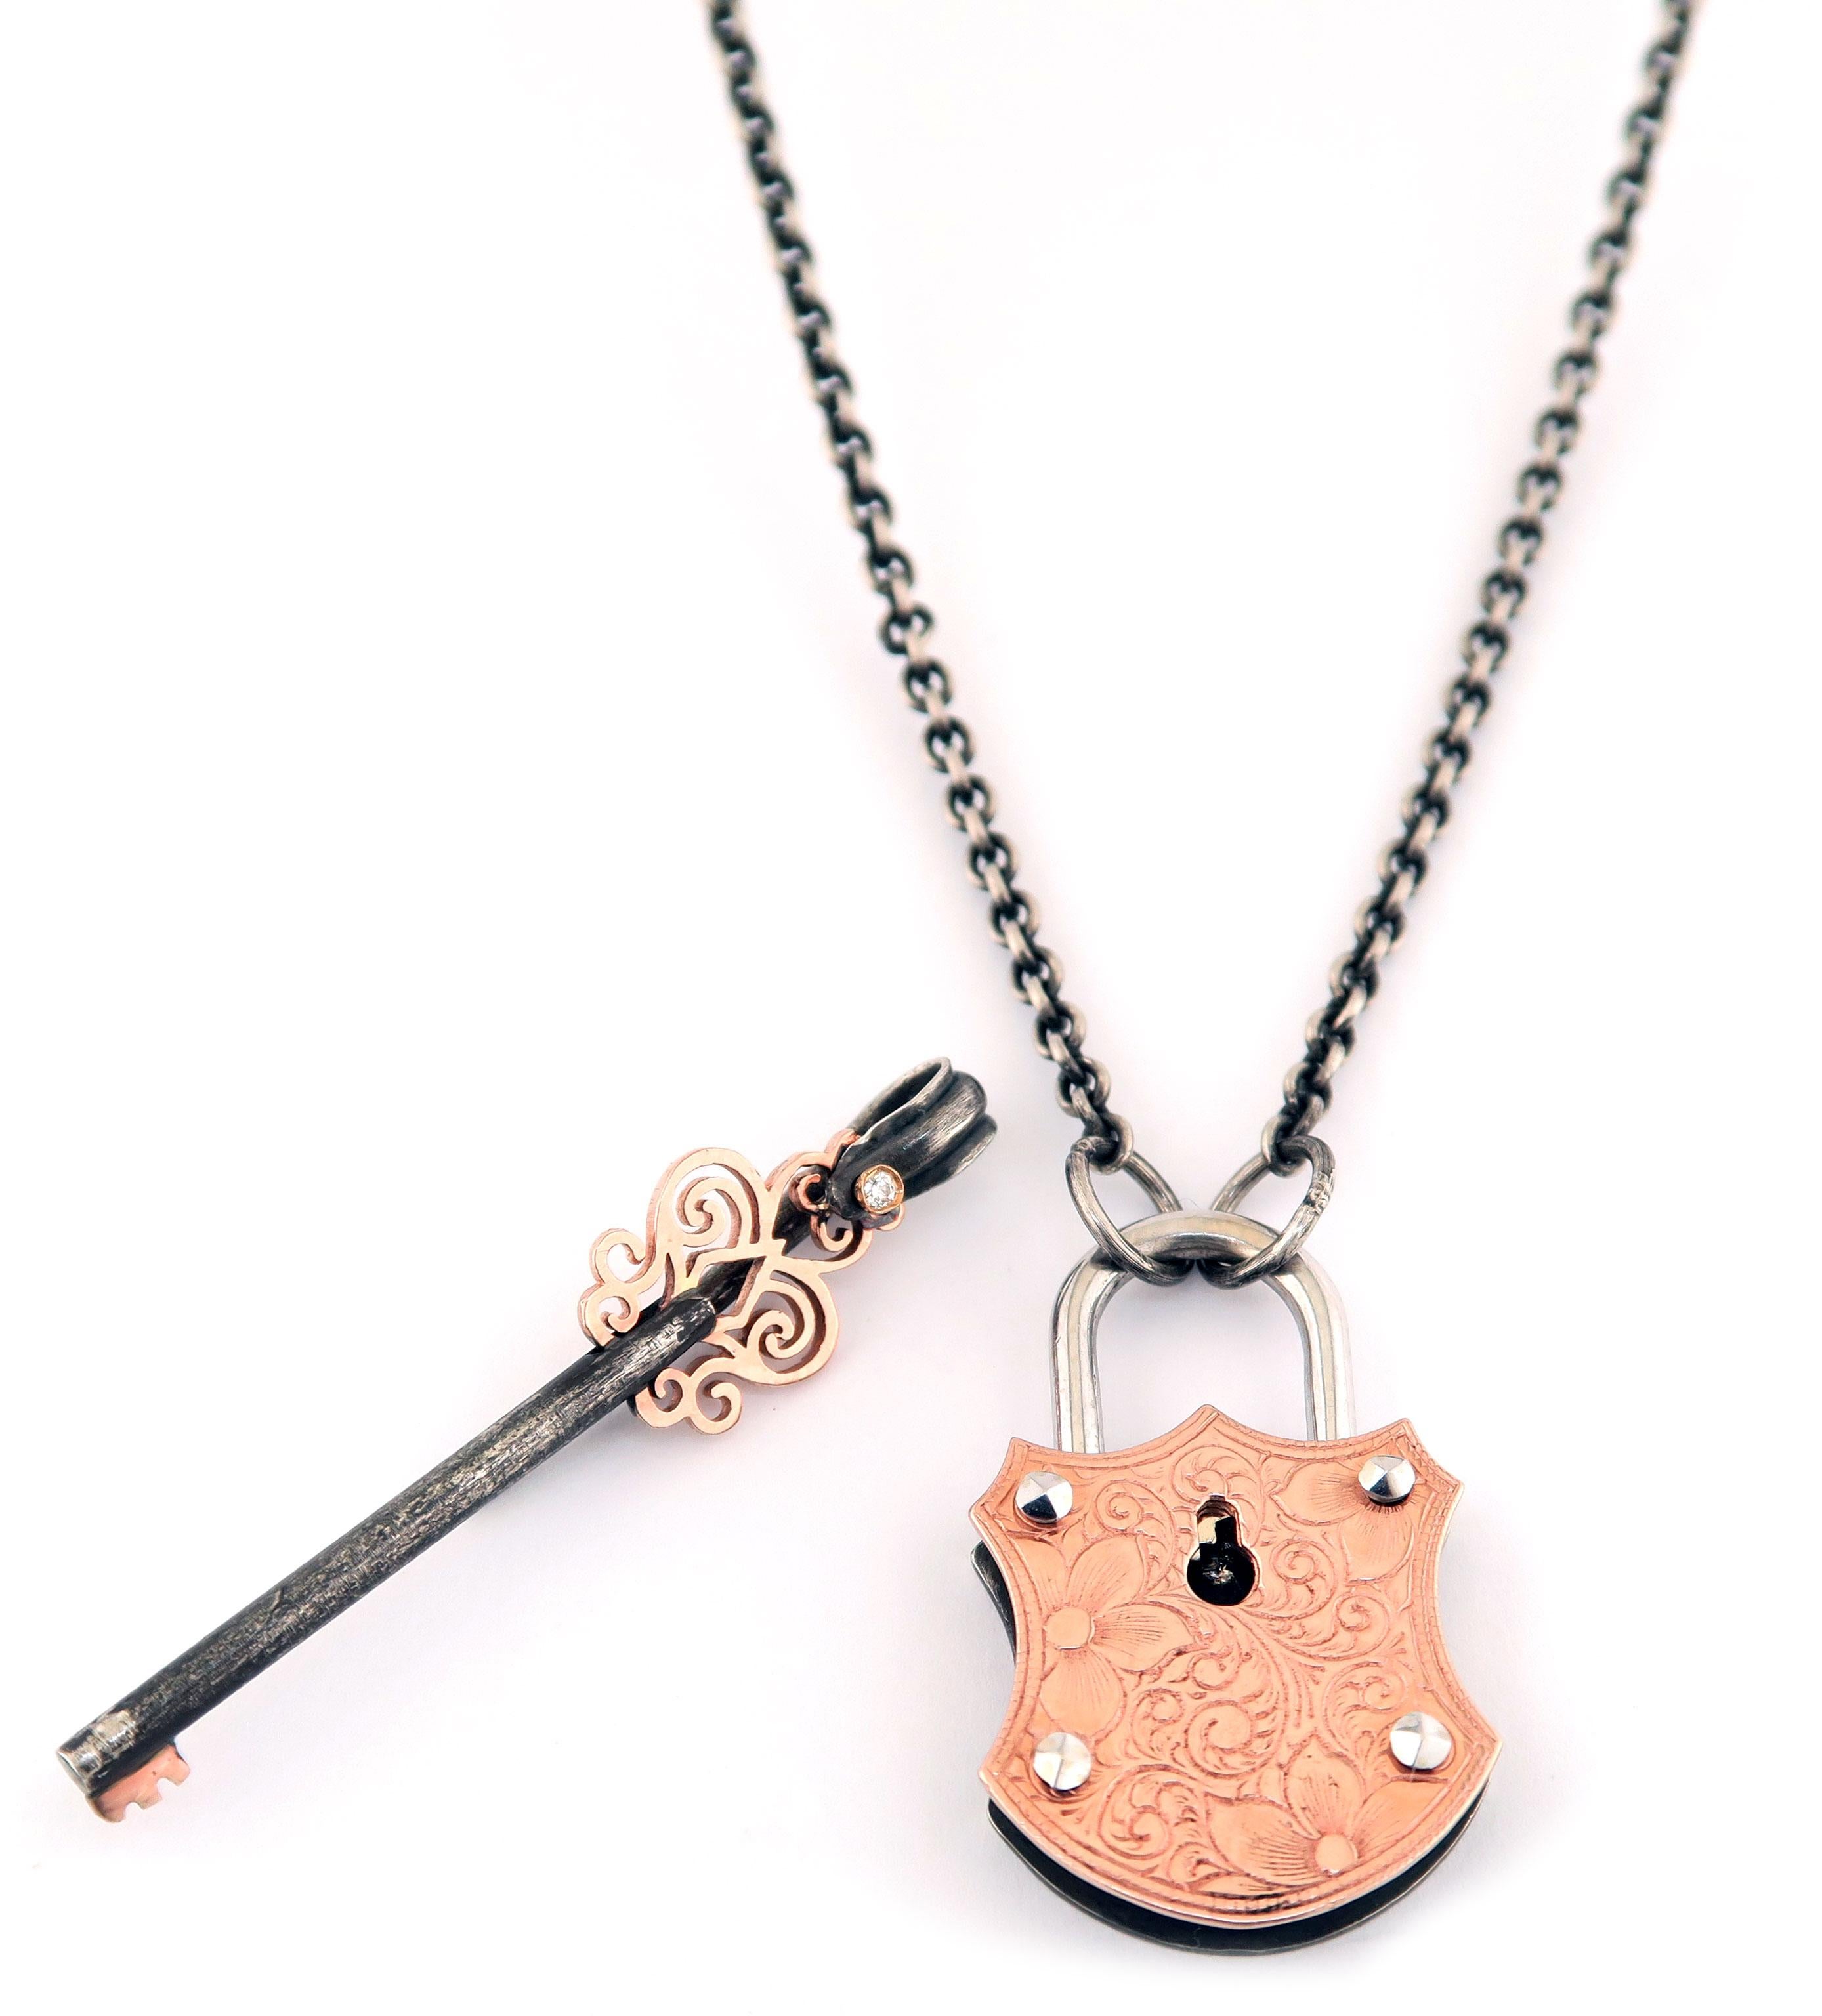 engraved key necklace